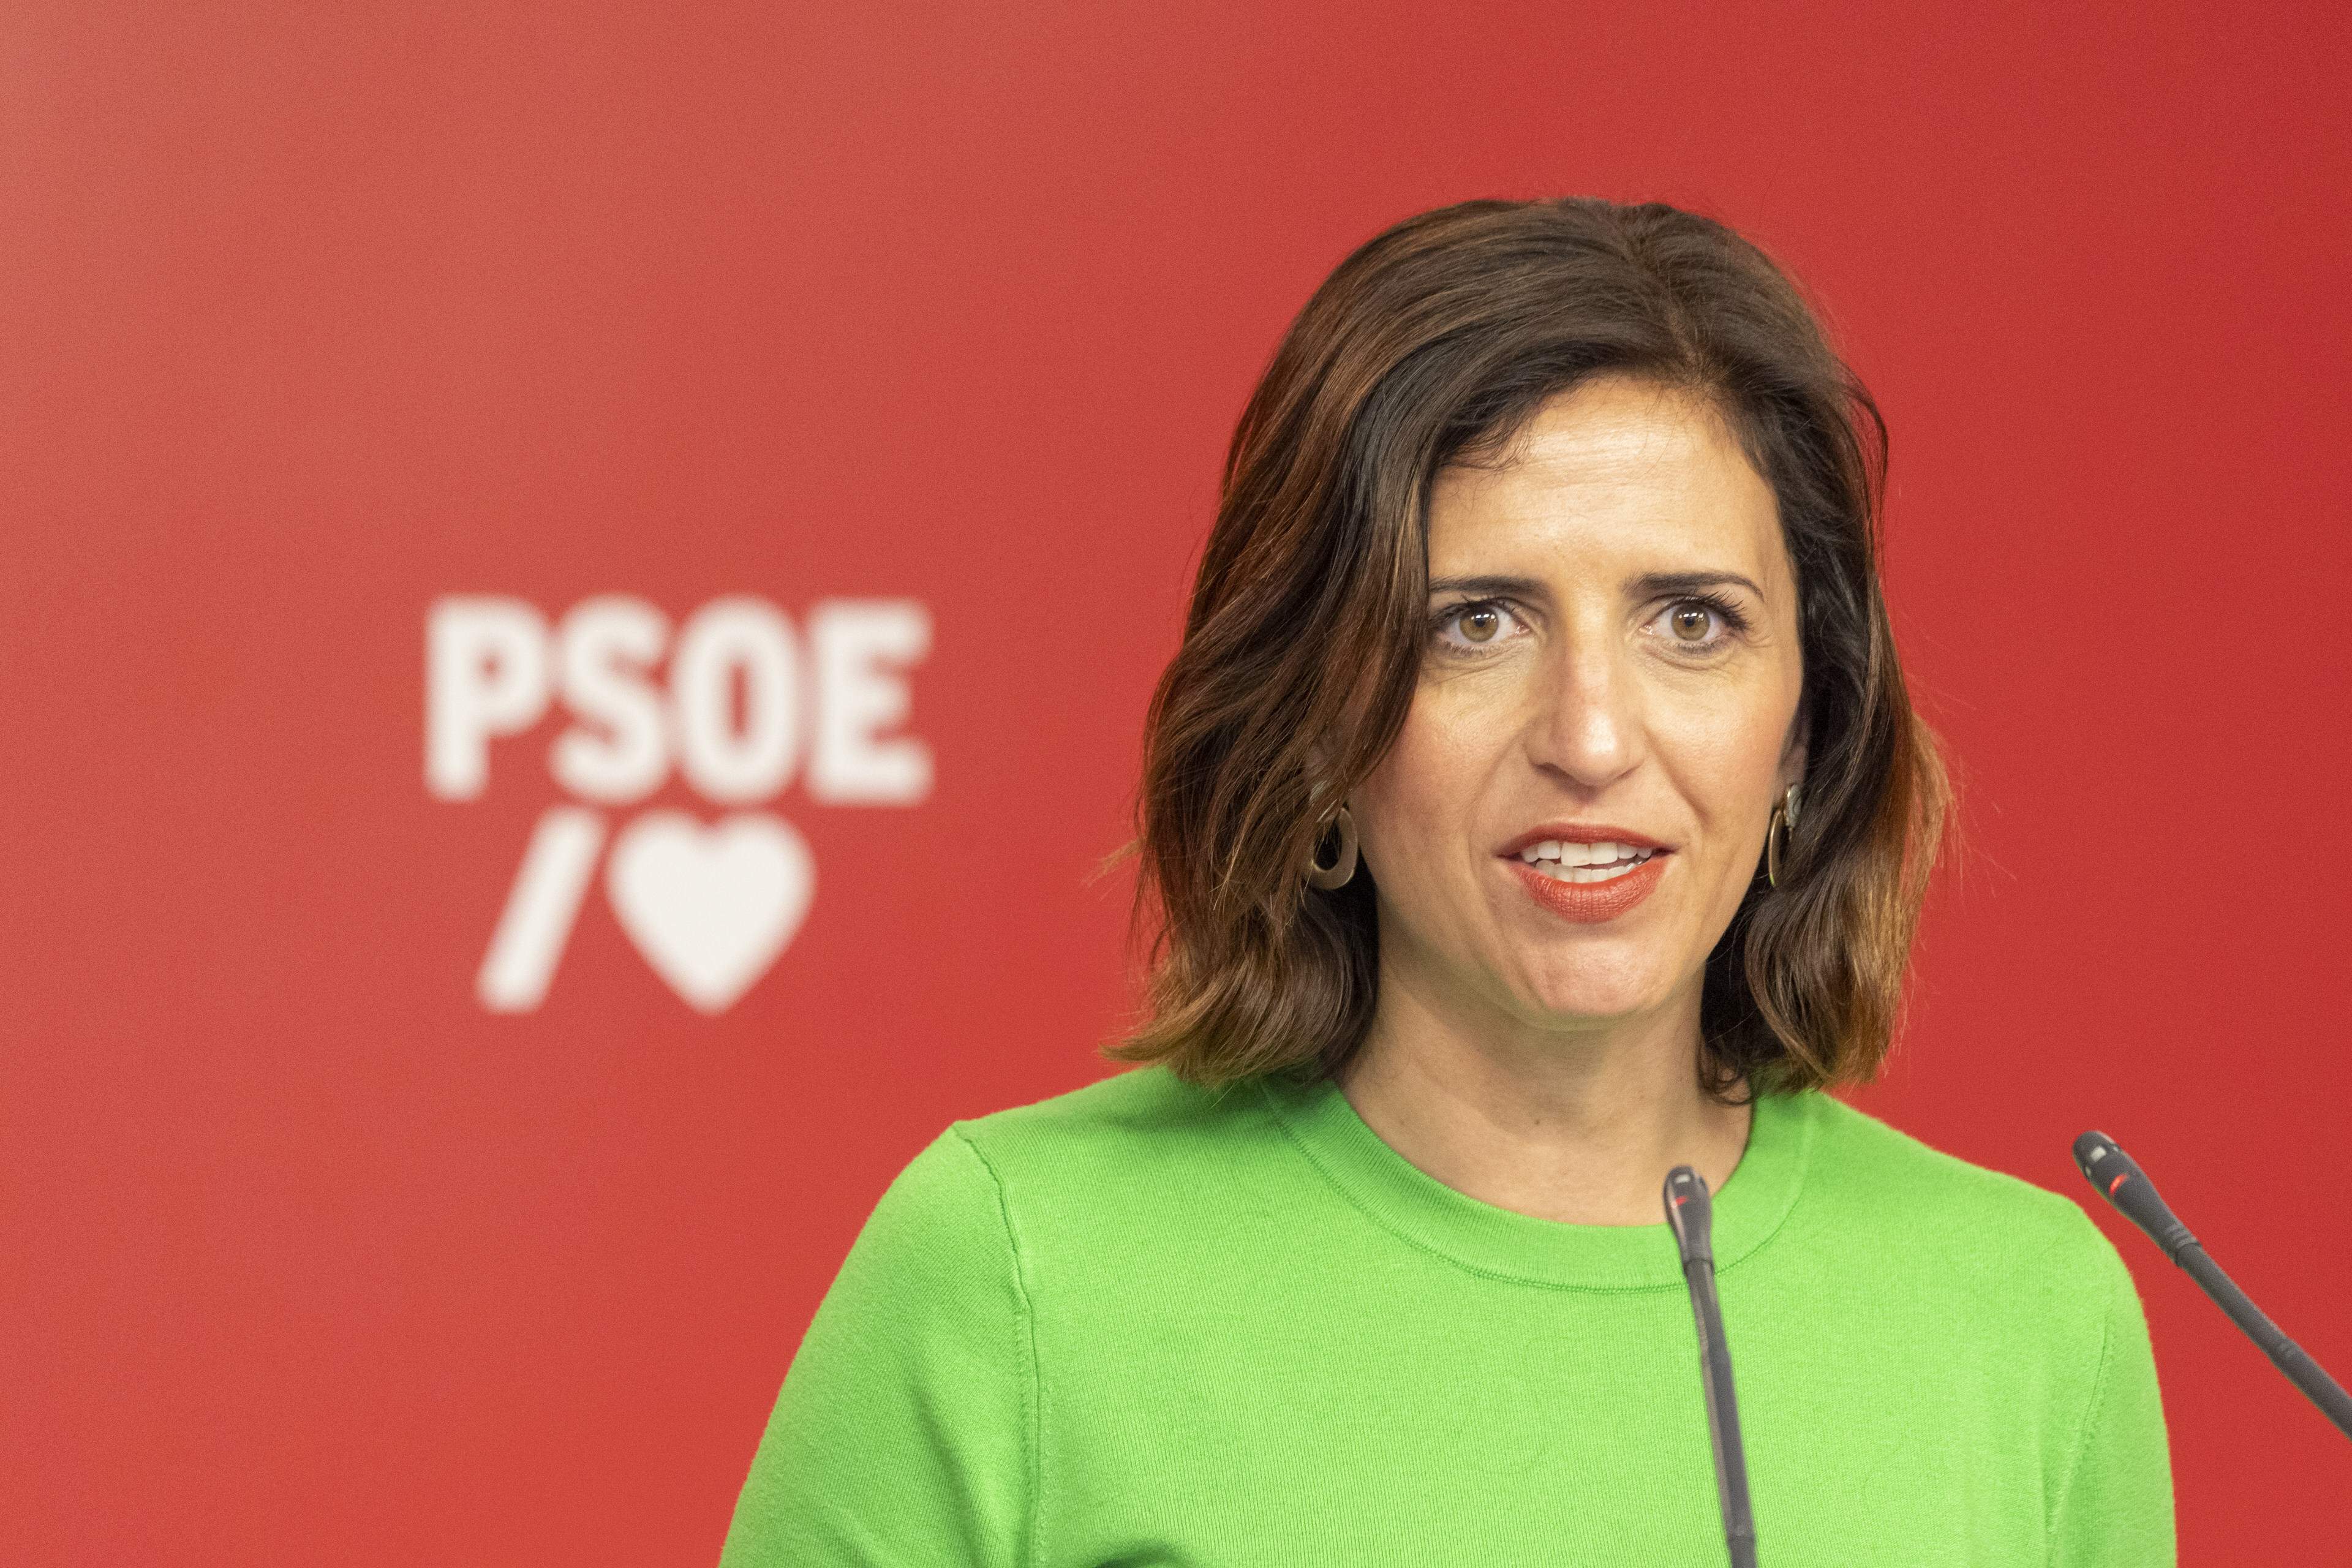 The PSOE backs away from a unique financing system for Catalonia after Sánchez's earlier hints